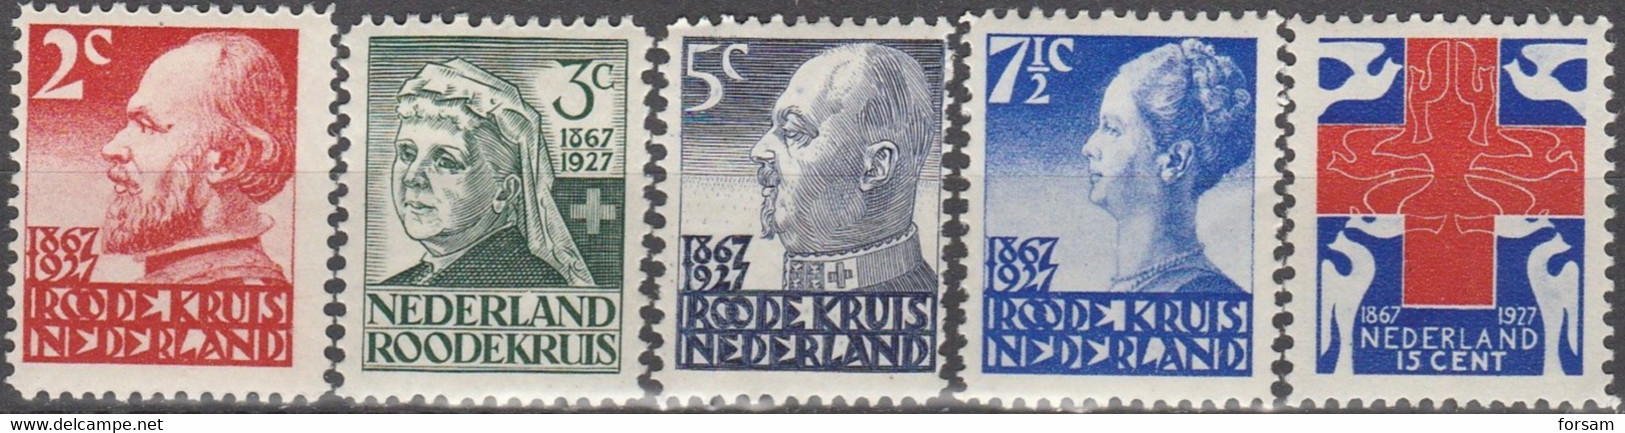 NETHERLANDS..1927..Michel # 196 B,197 A, 198 A, 199 B, 200 A...MLH...MiCV - 72 Euro.. - Unused Stamps